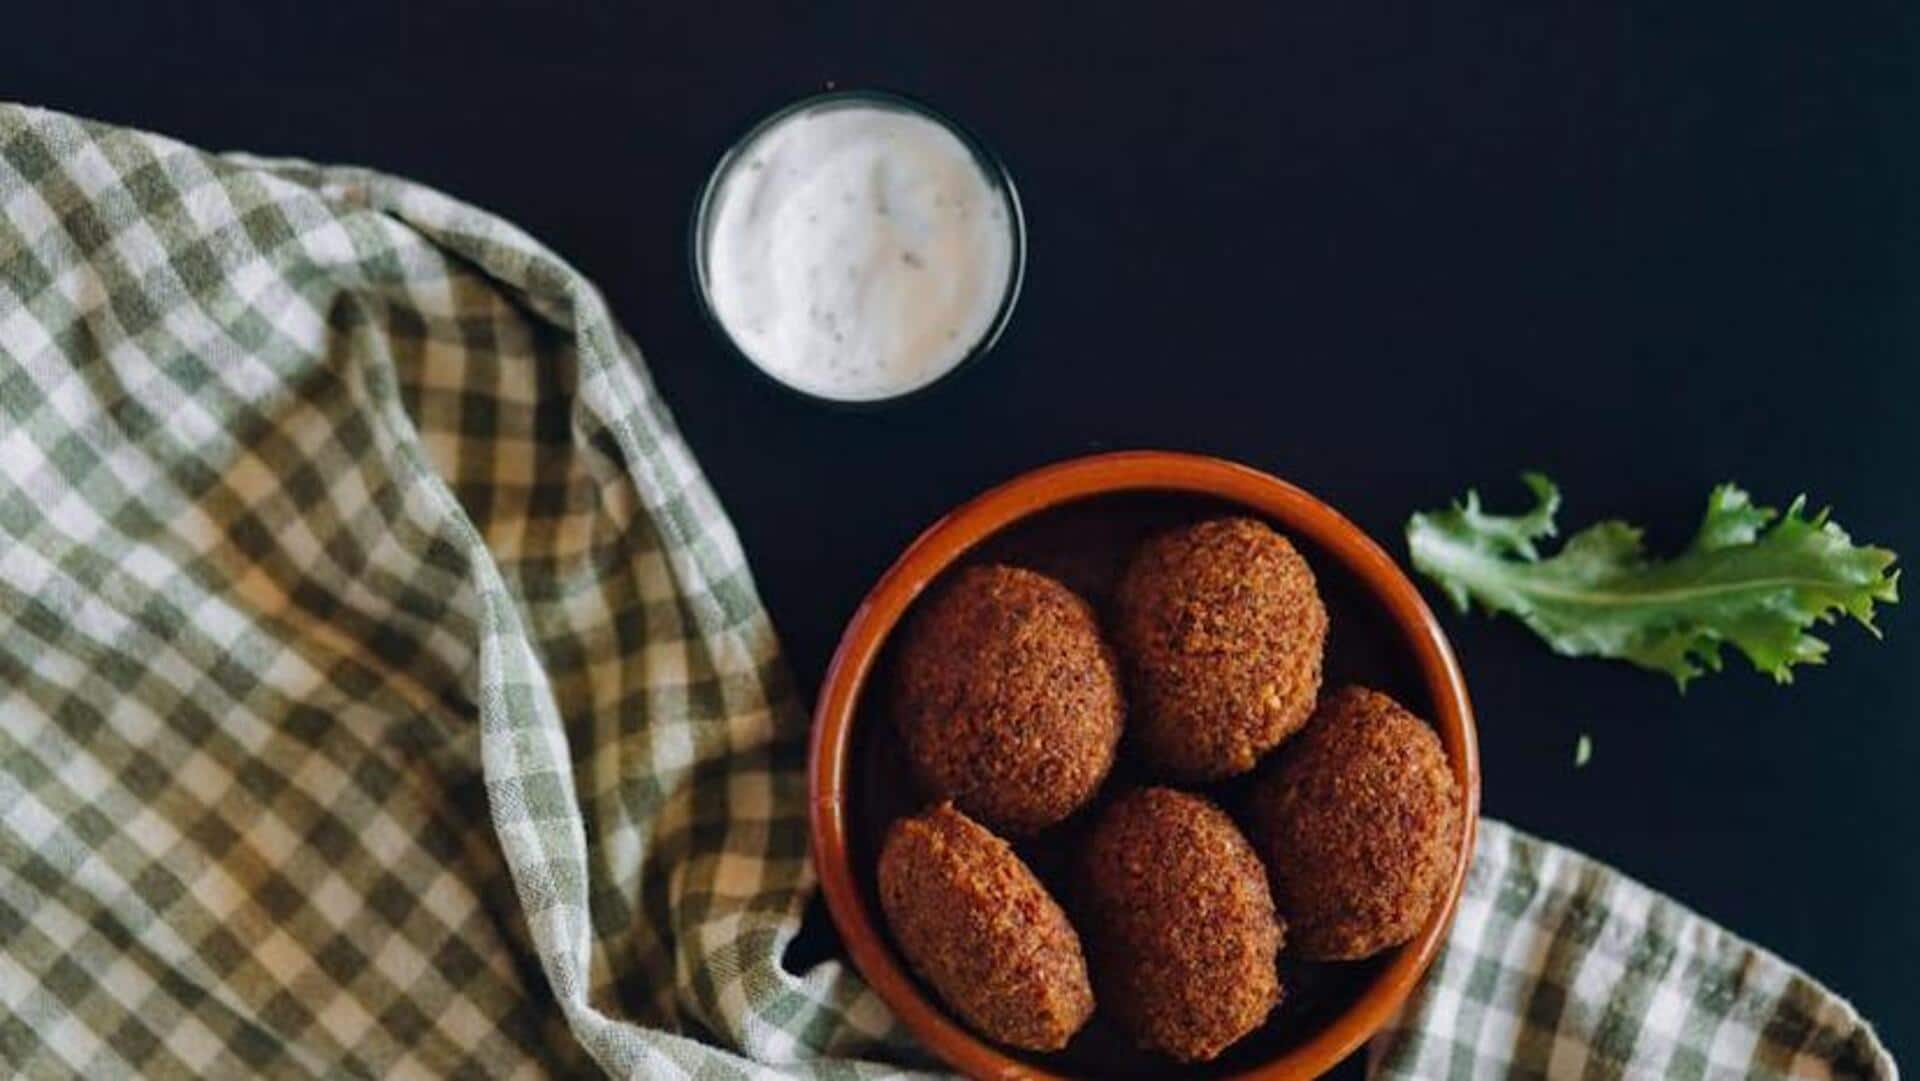 Make traditional falafel at home with this step-by-step recipe